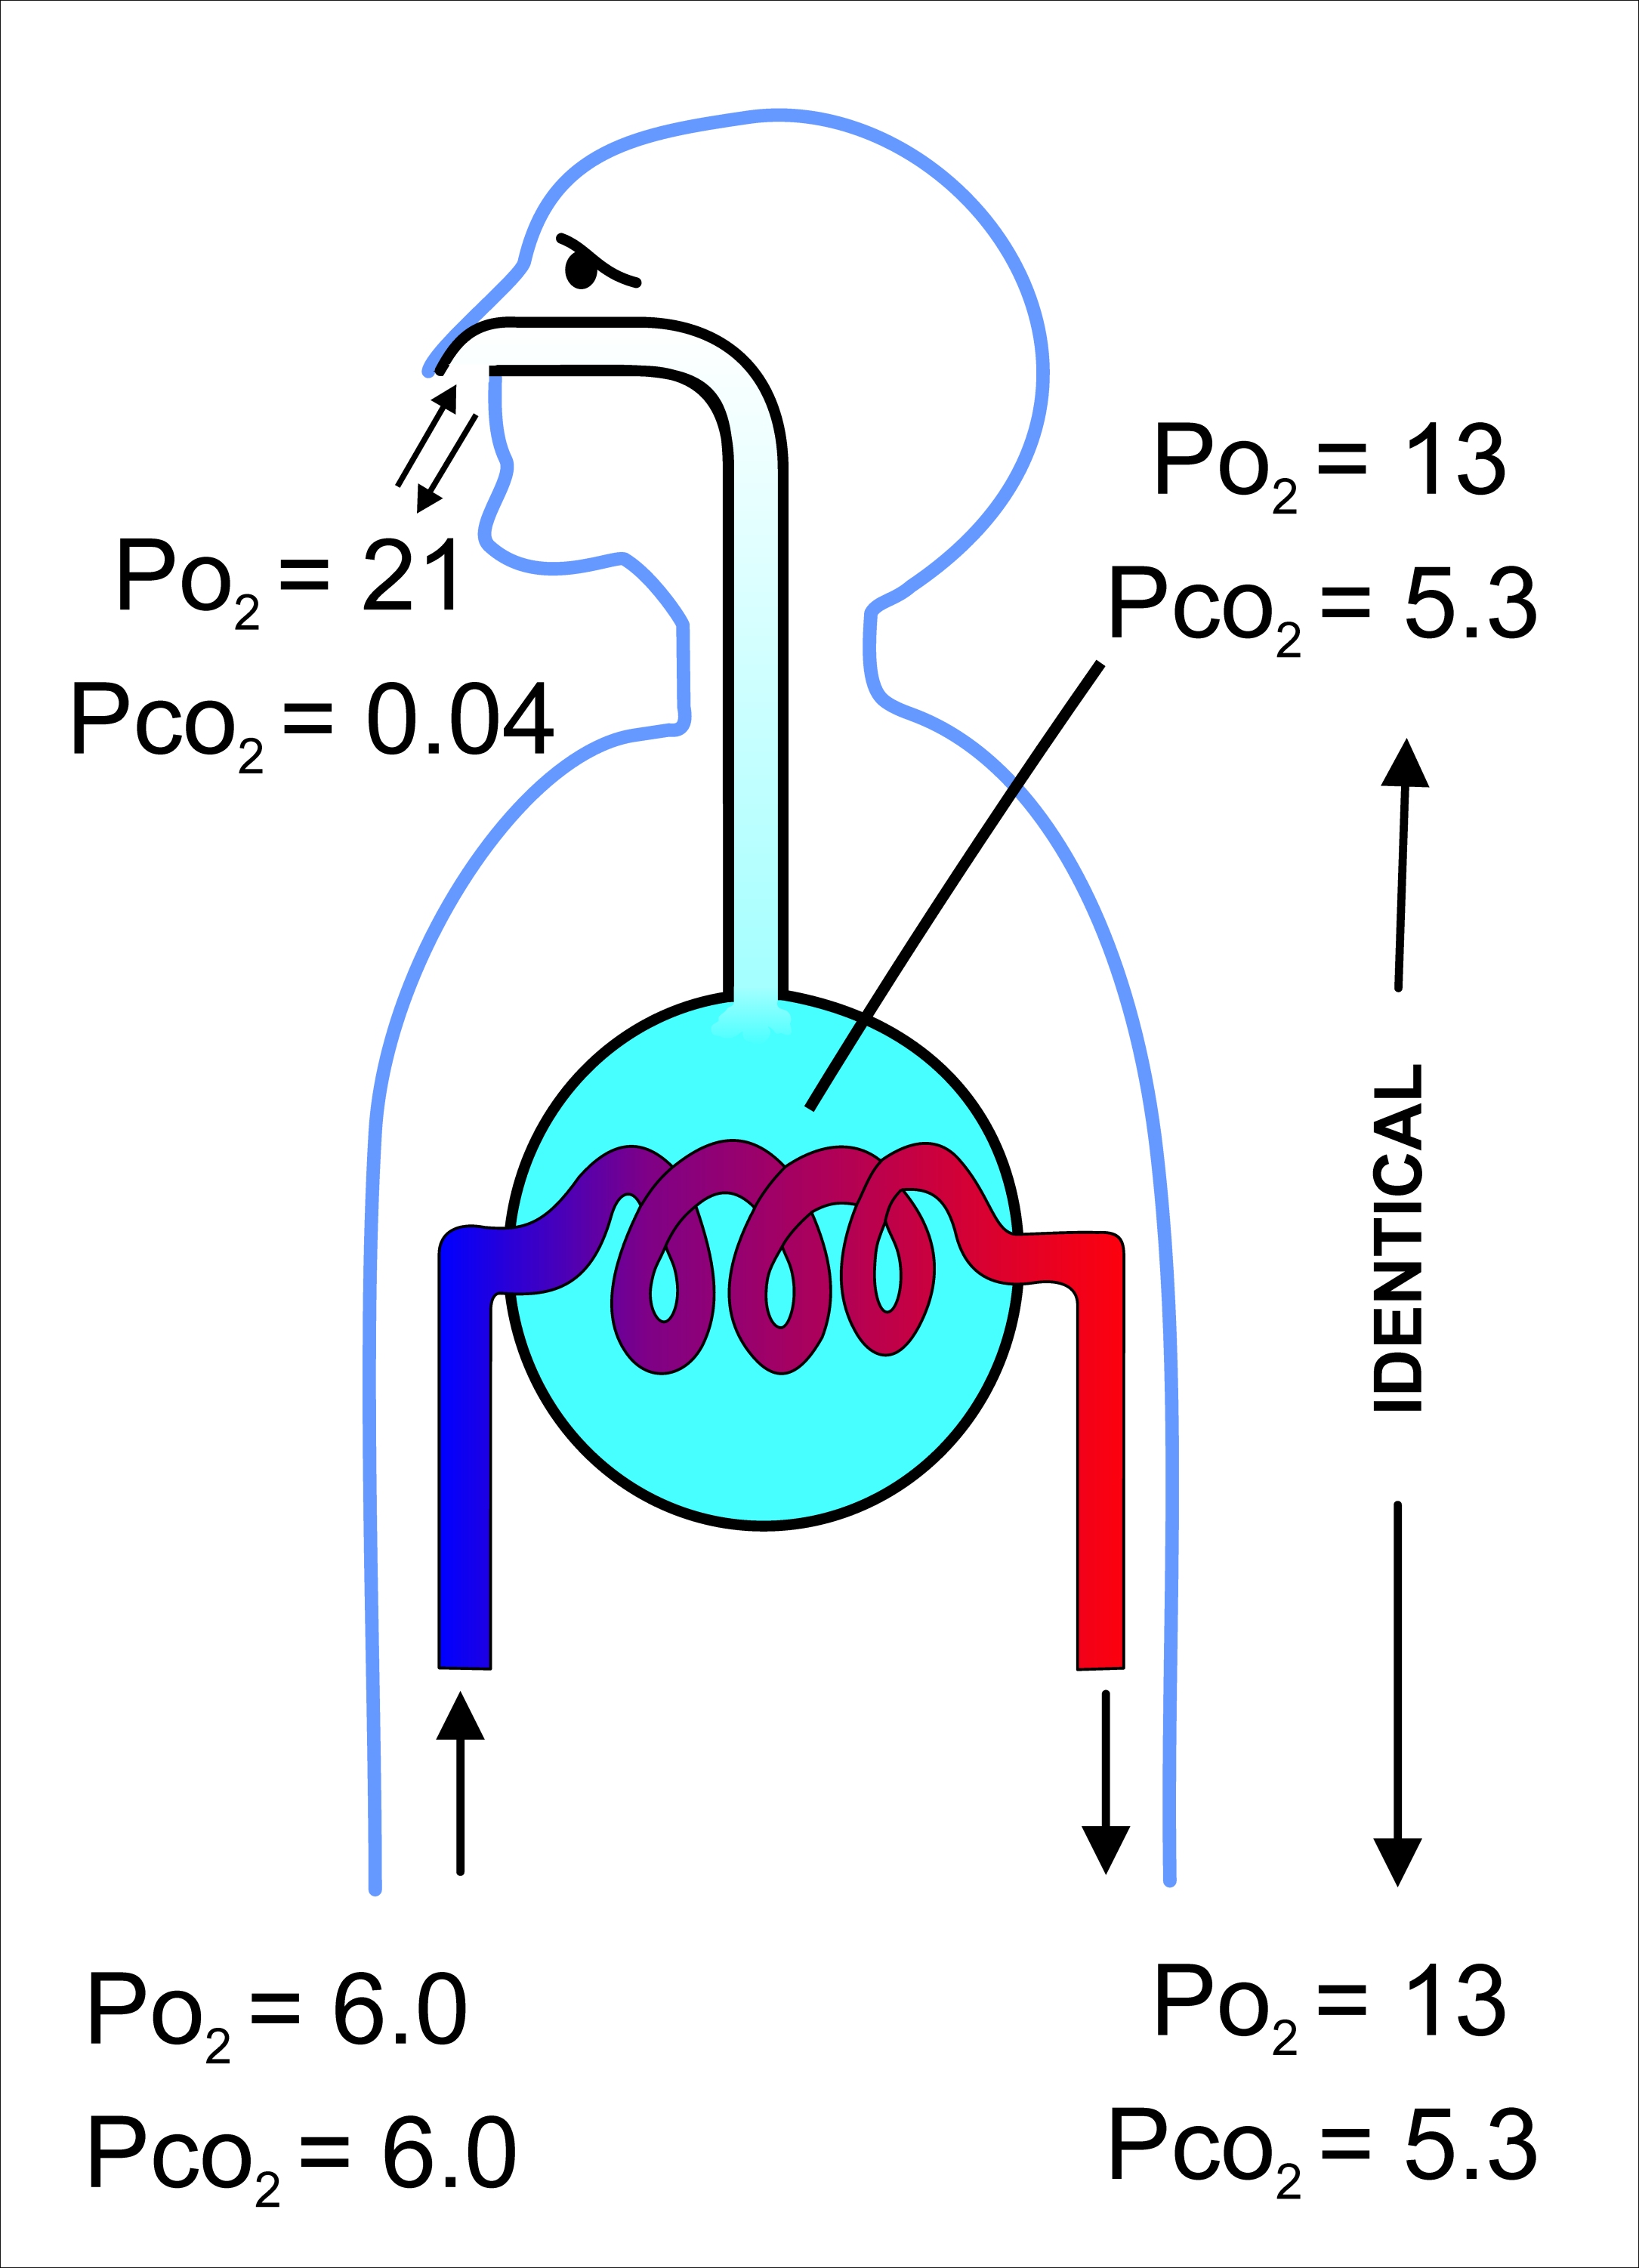 A highly diagrammatic illustration of the process of gas exchange in the mammalian lungs, emphasizing the differences between the gas compositions of the ambient air, the alveolar air (light blue) with which the pulmonary capillary blood equilibrates, and the blood gas tensions in the pulmonary arterial (blue blood entering the lung on the left) and venous blood (red blood leaving the lung on the right). All the gas tensions are in kPa. To convert to mm Hg, multiply by 7.5.